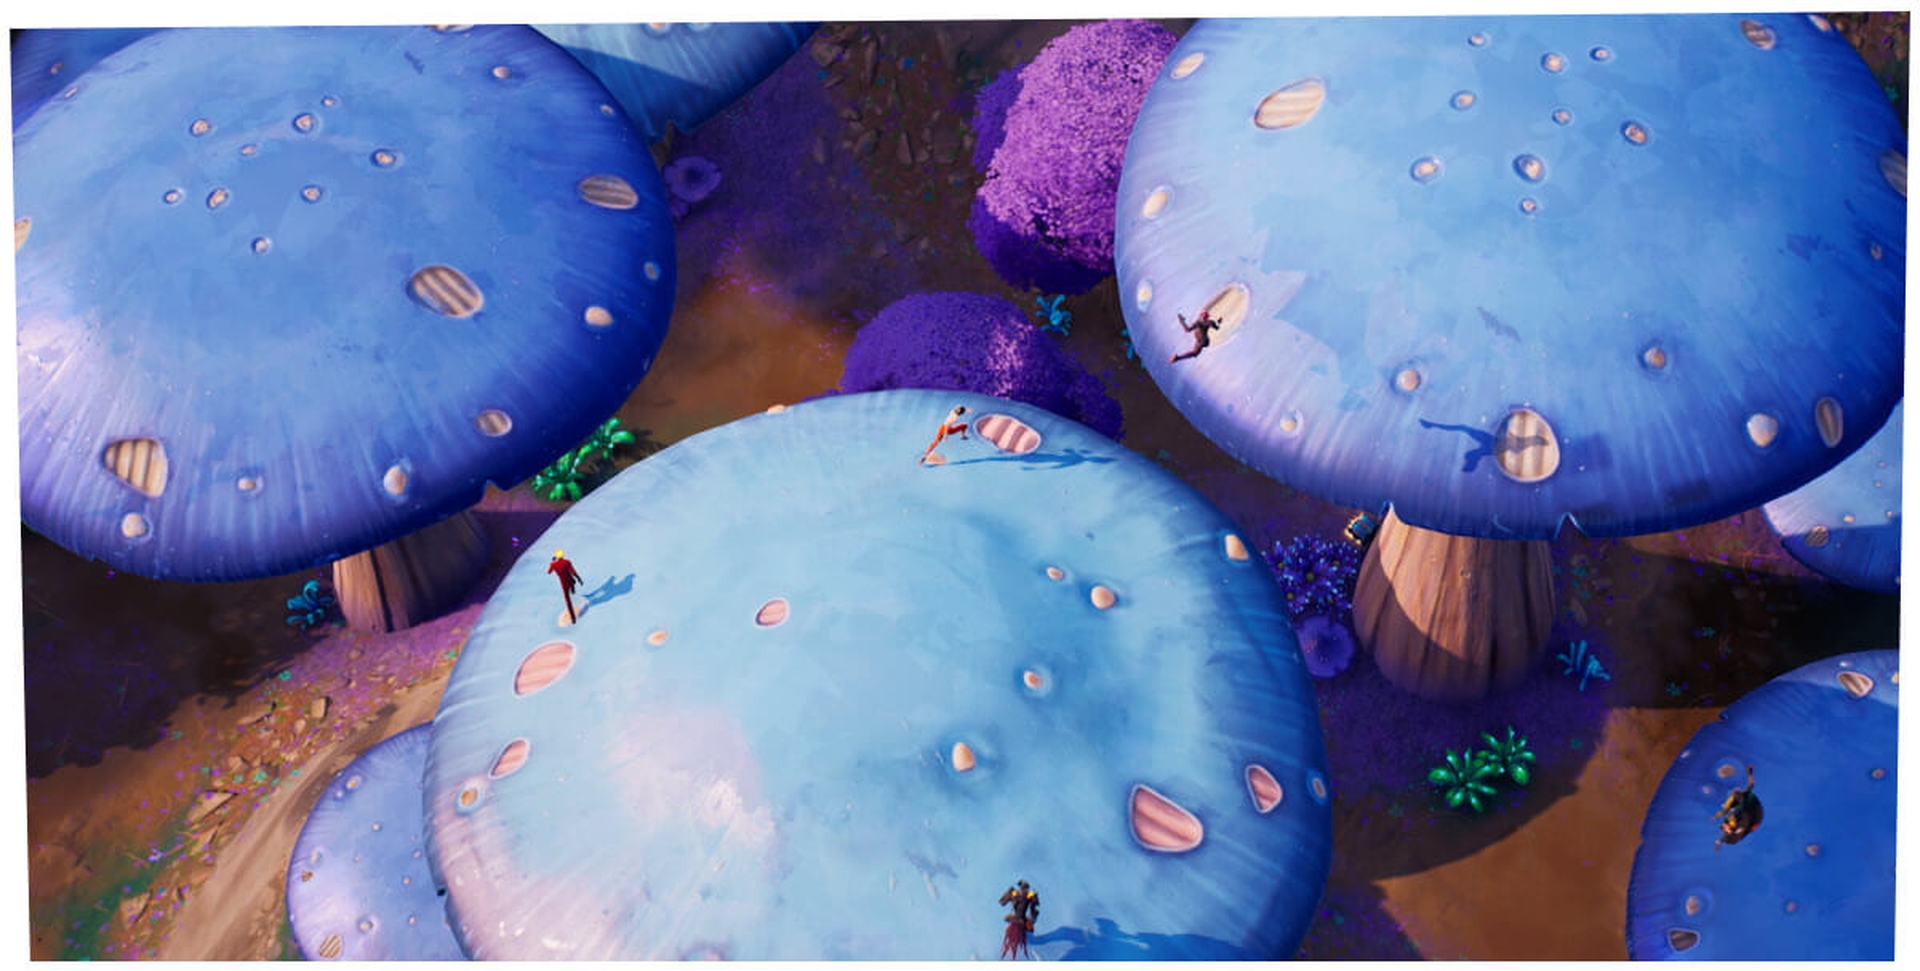 In this article, we are going to go over the best landing spots Fortnite Chapter 3 Season 3, so you can jump right in and claim that victory royale.